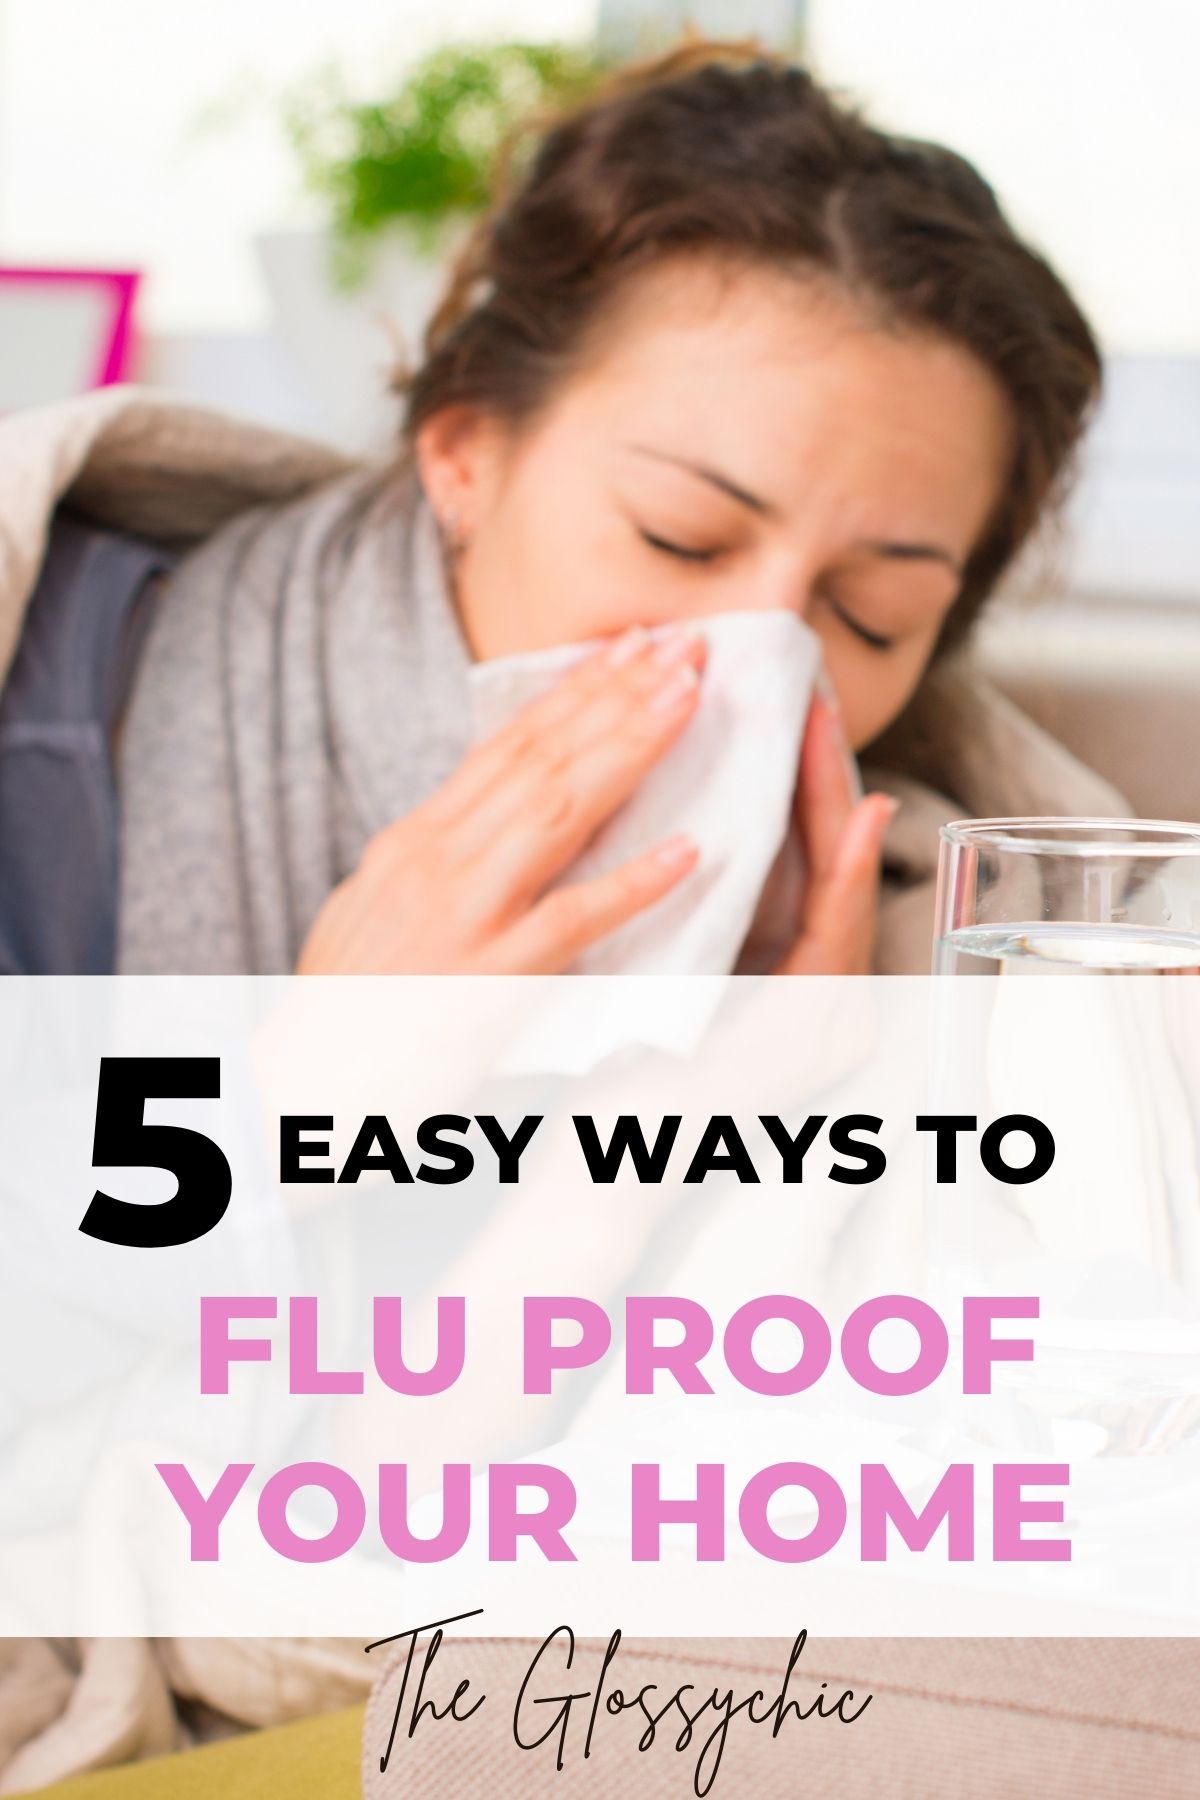 How To Flu Proof Your Home – 5 Easy Ways